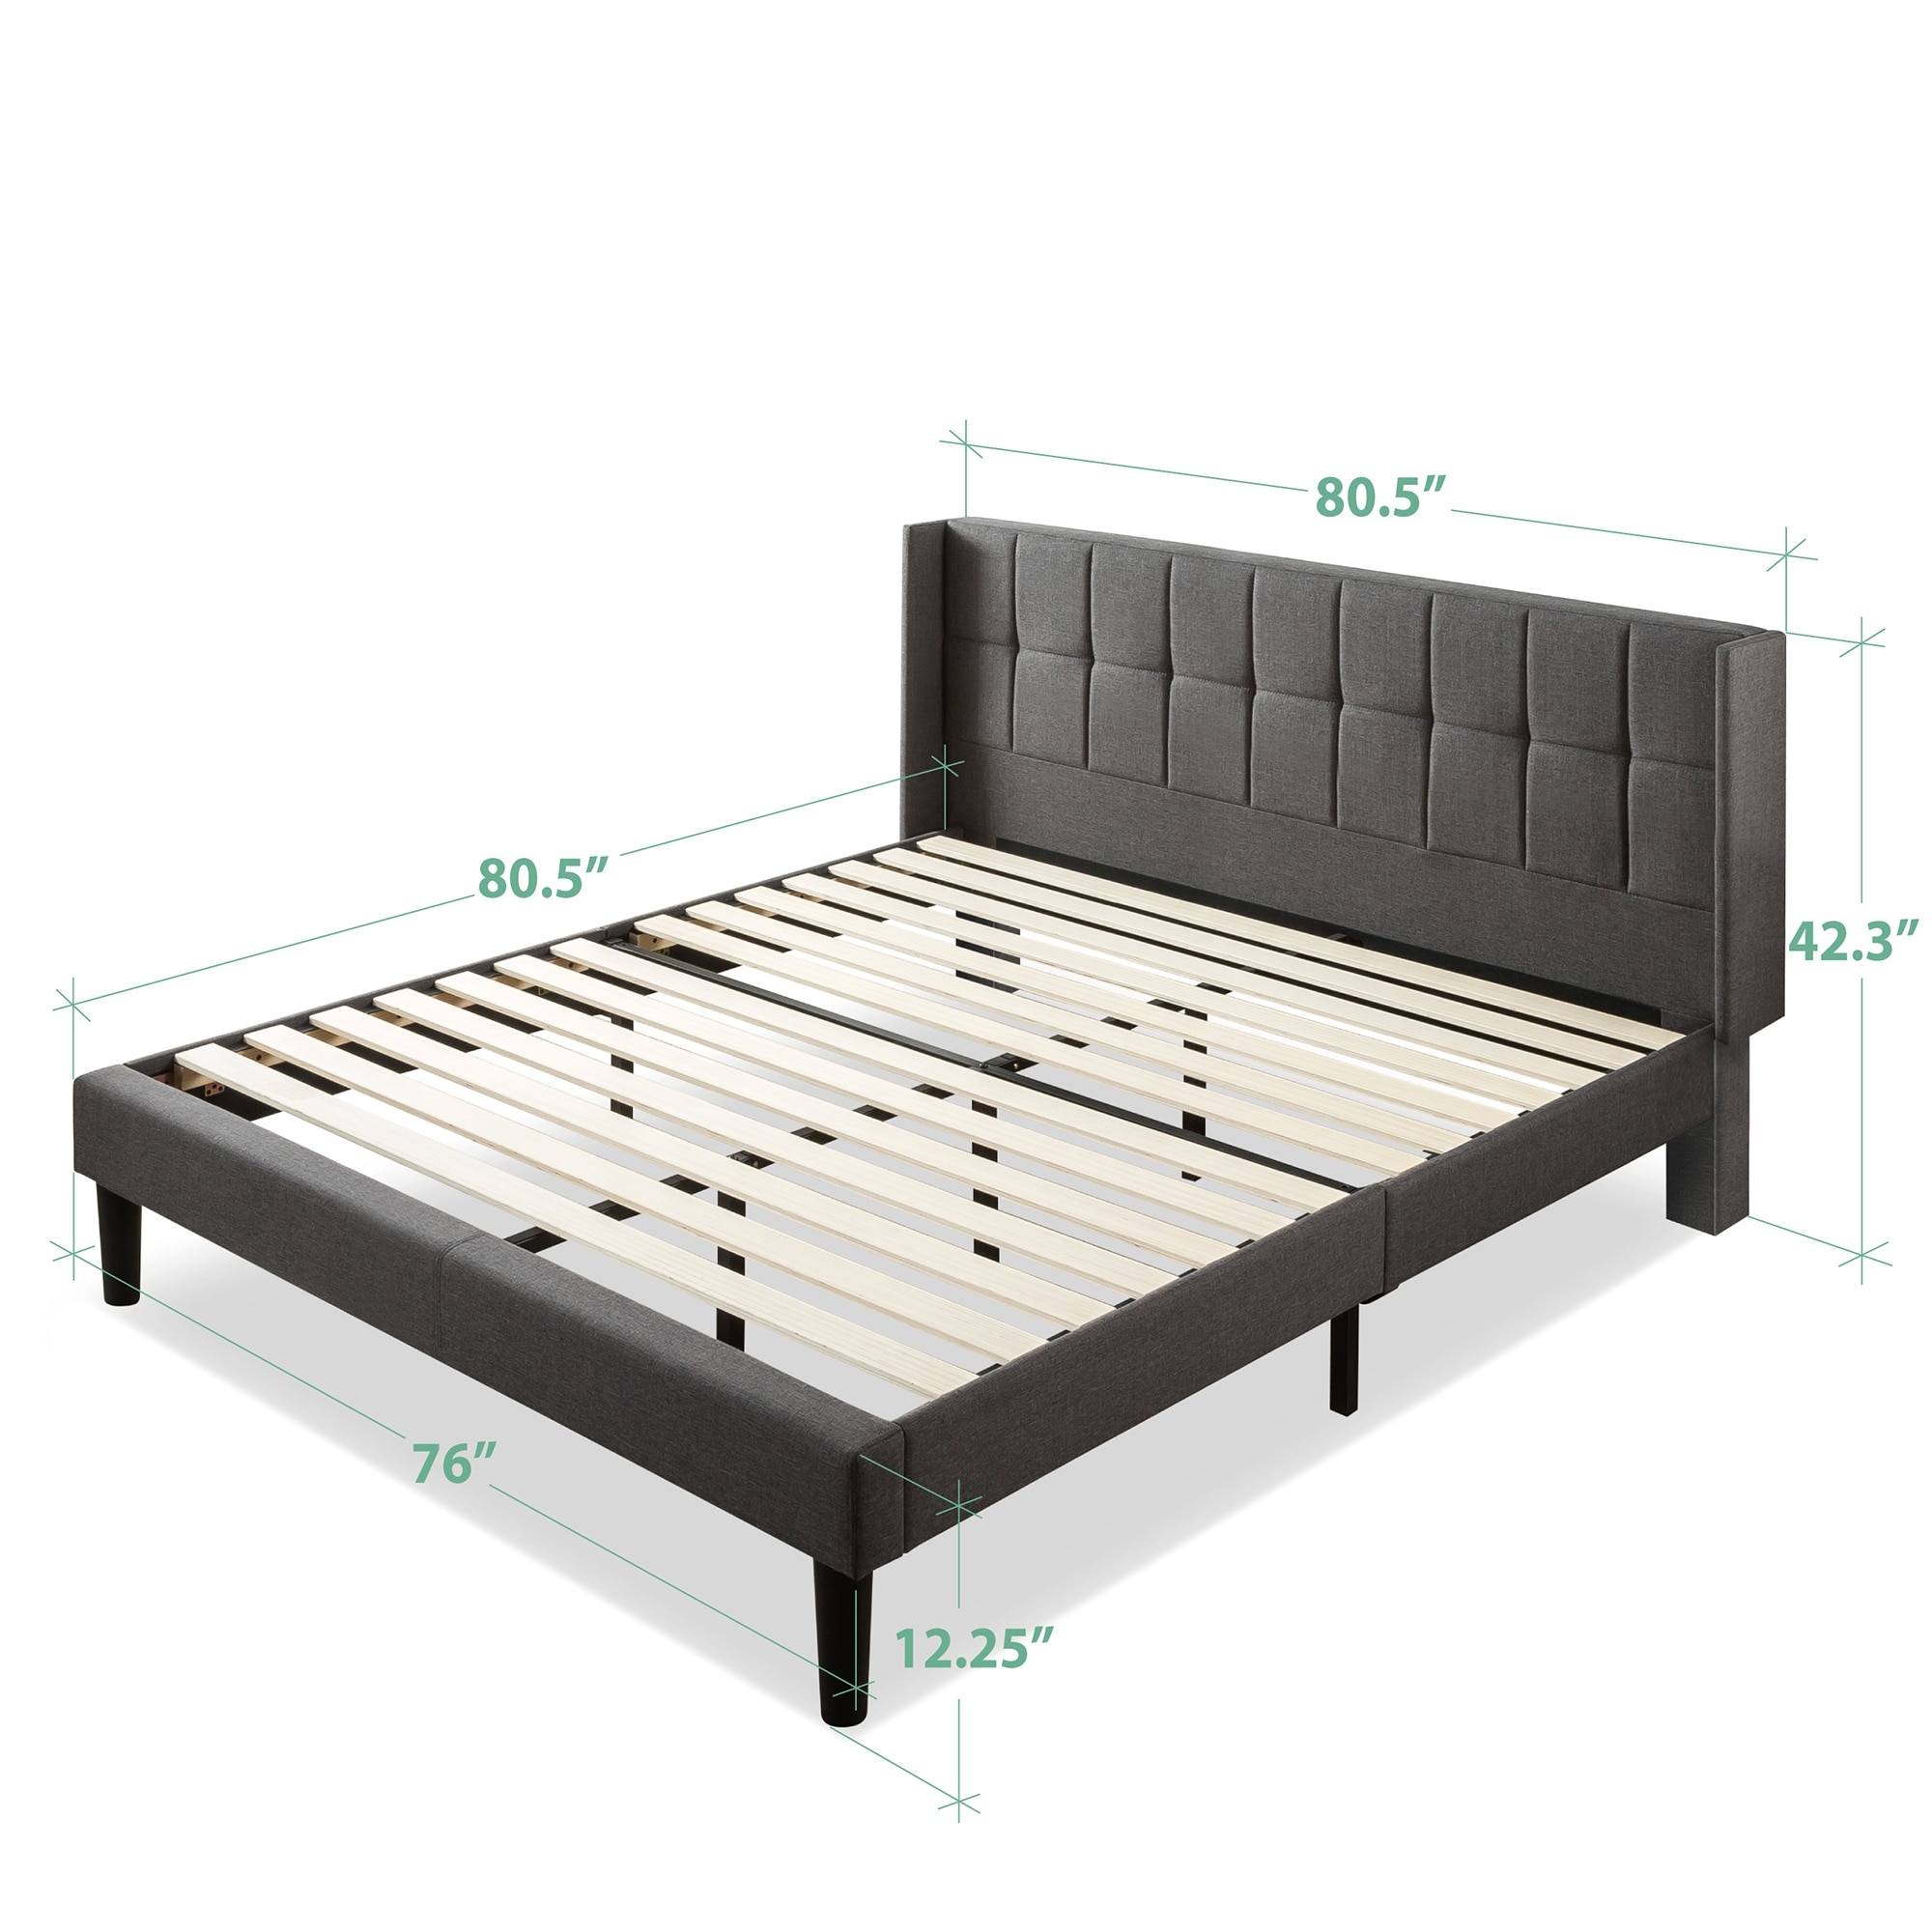 King Grey Zinus Upholstered Square Stitched Platform Bed//Mattress Foundation//Easy Assembly//Strong Wood Slat Support